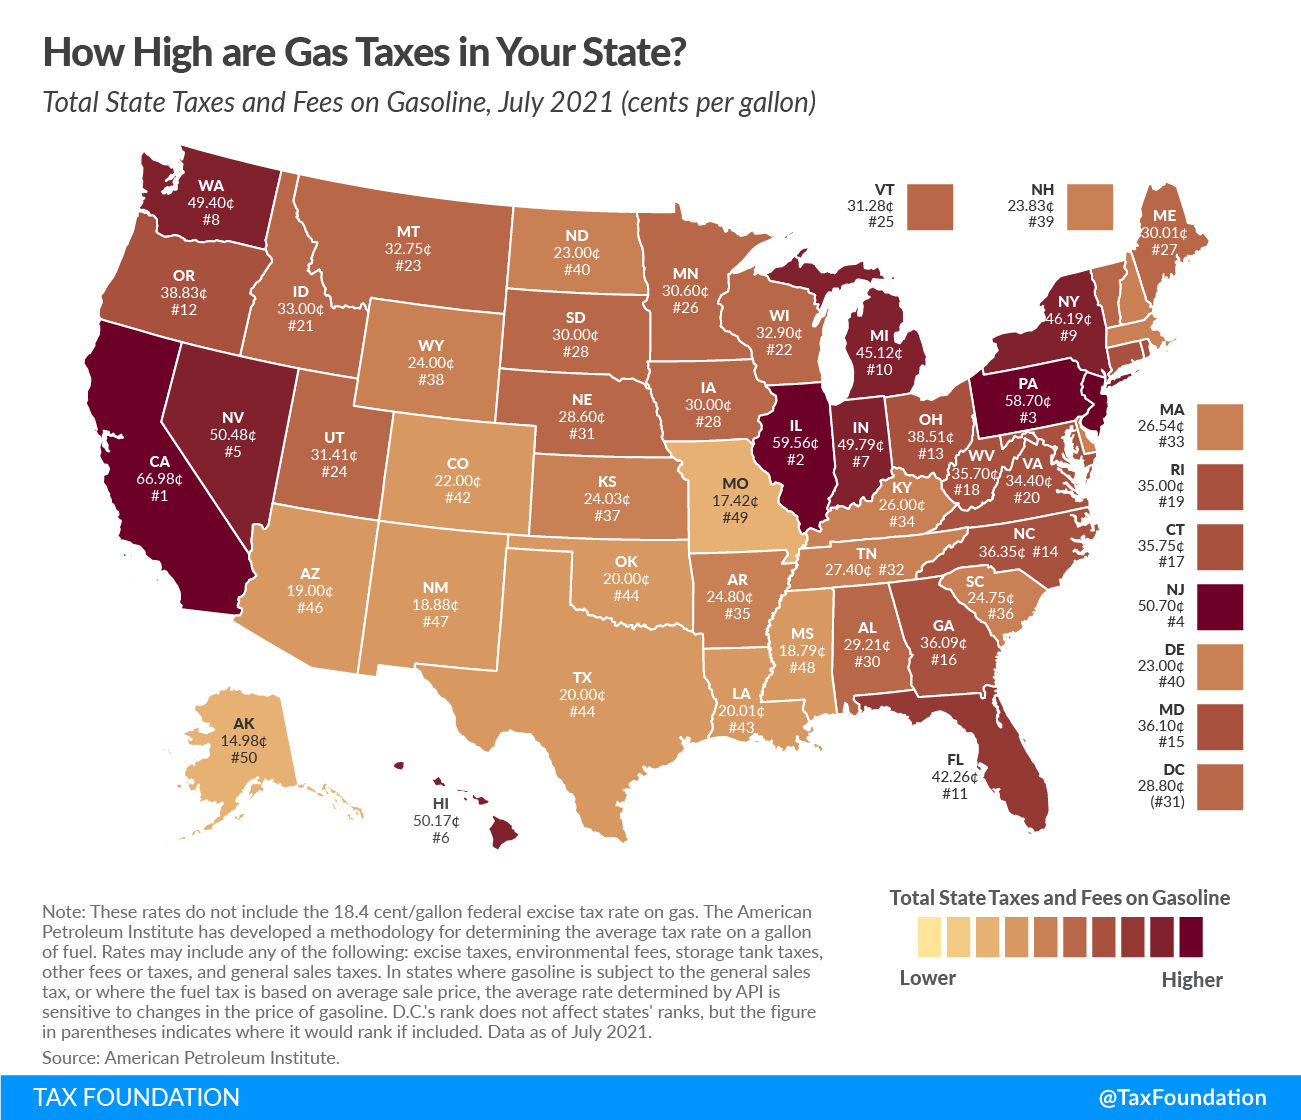 2021 gas tax rates and 2021 state gas tax rankings. How much is gas tax rates in each state. Which state has the highest gas tax rate.